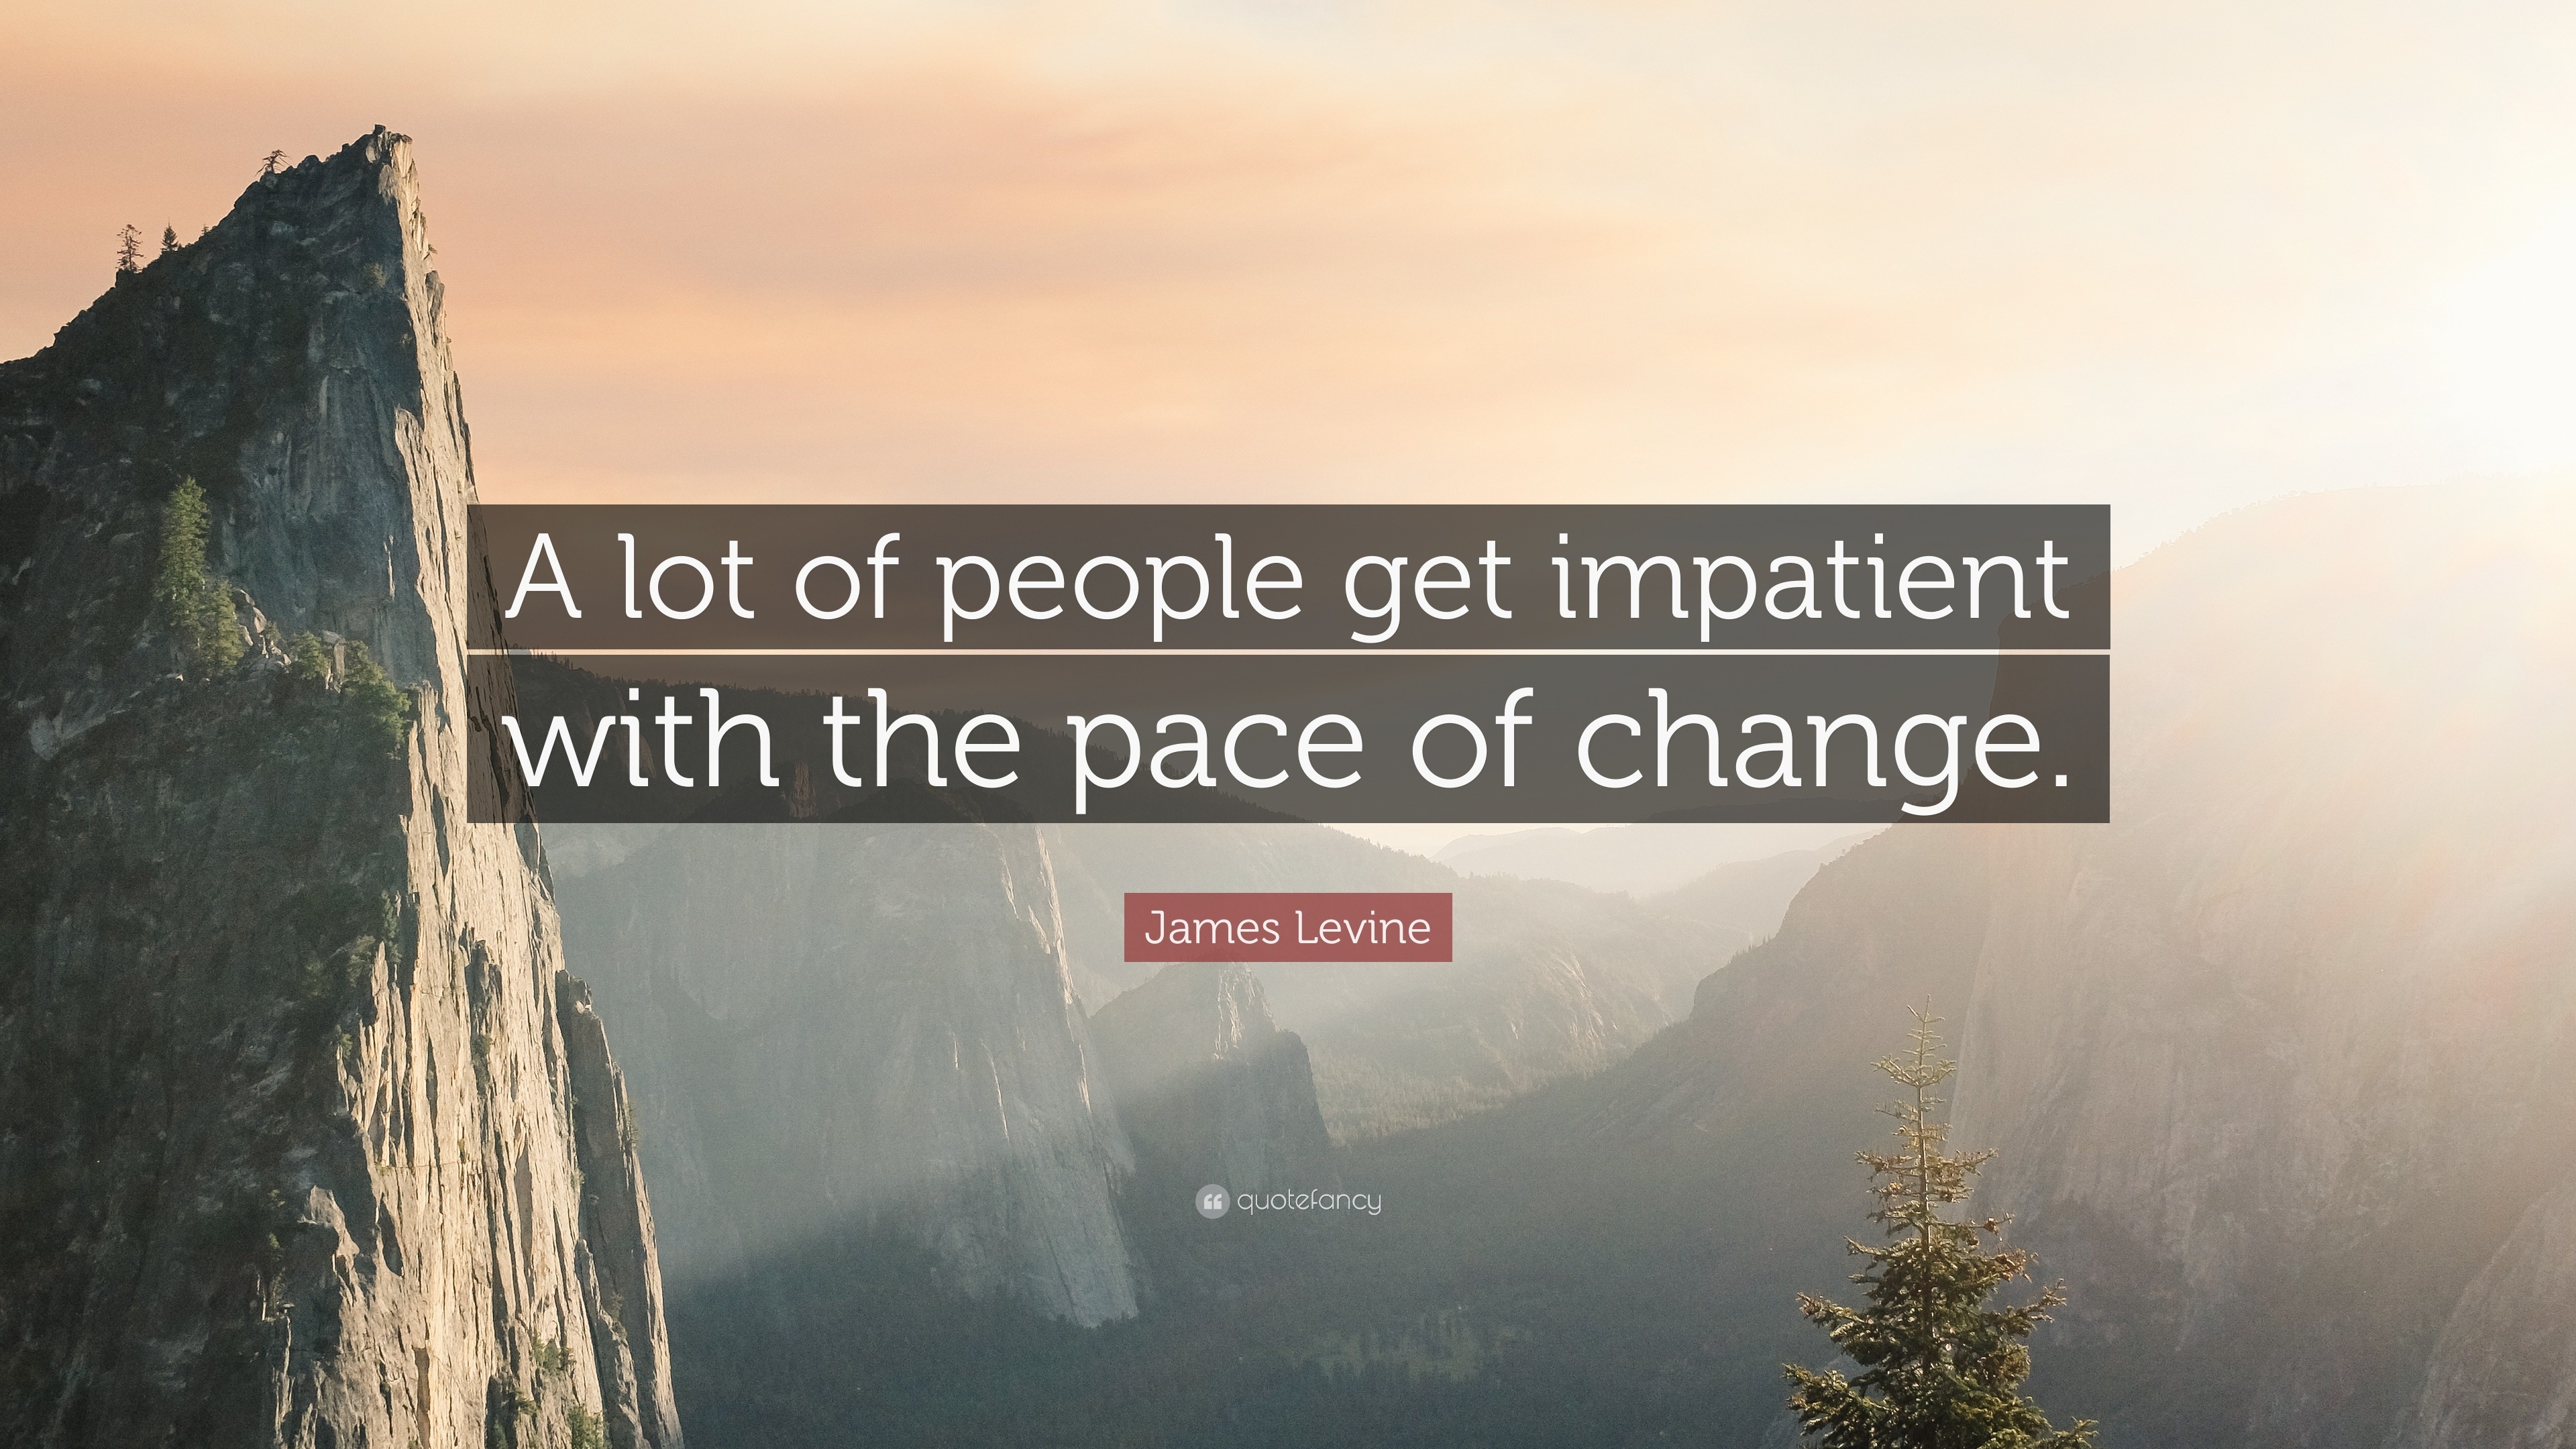 James Levine Quote: “A lot of people get impatient with the pace of ...